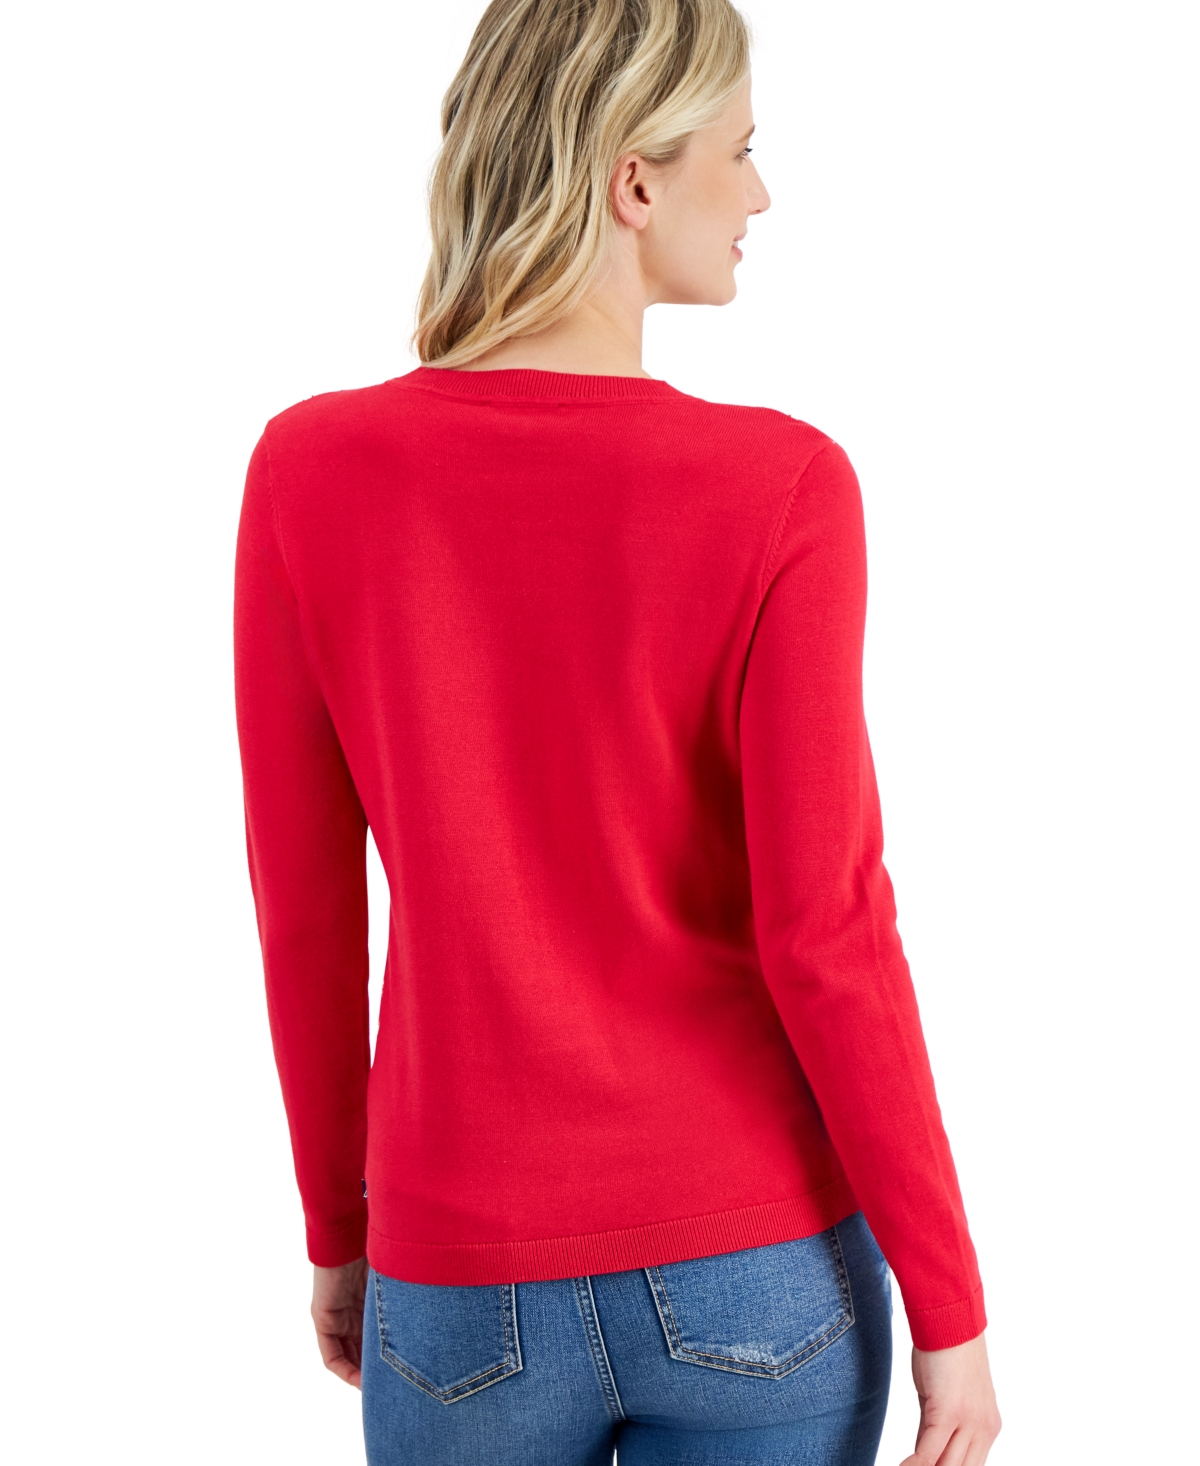 Shop Nautica Women's Cotton Circle Link Crewneck Sweater In Bright Red